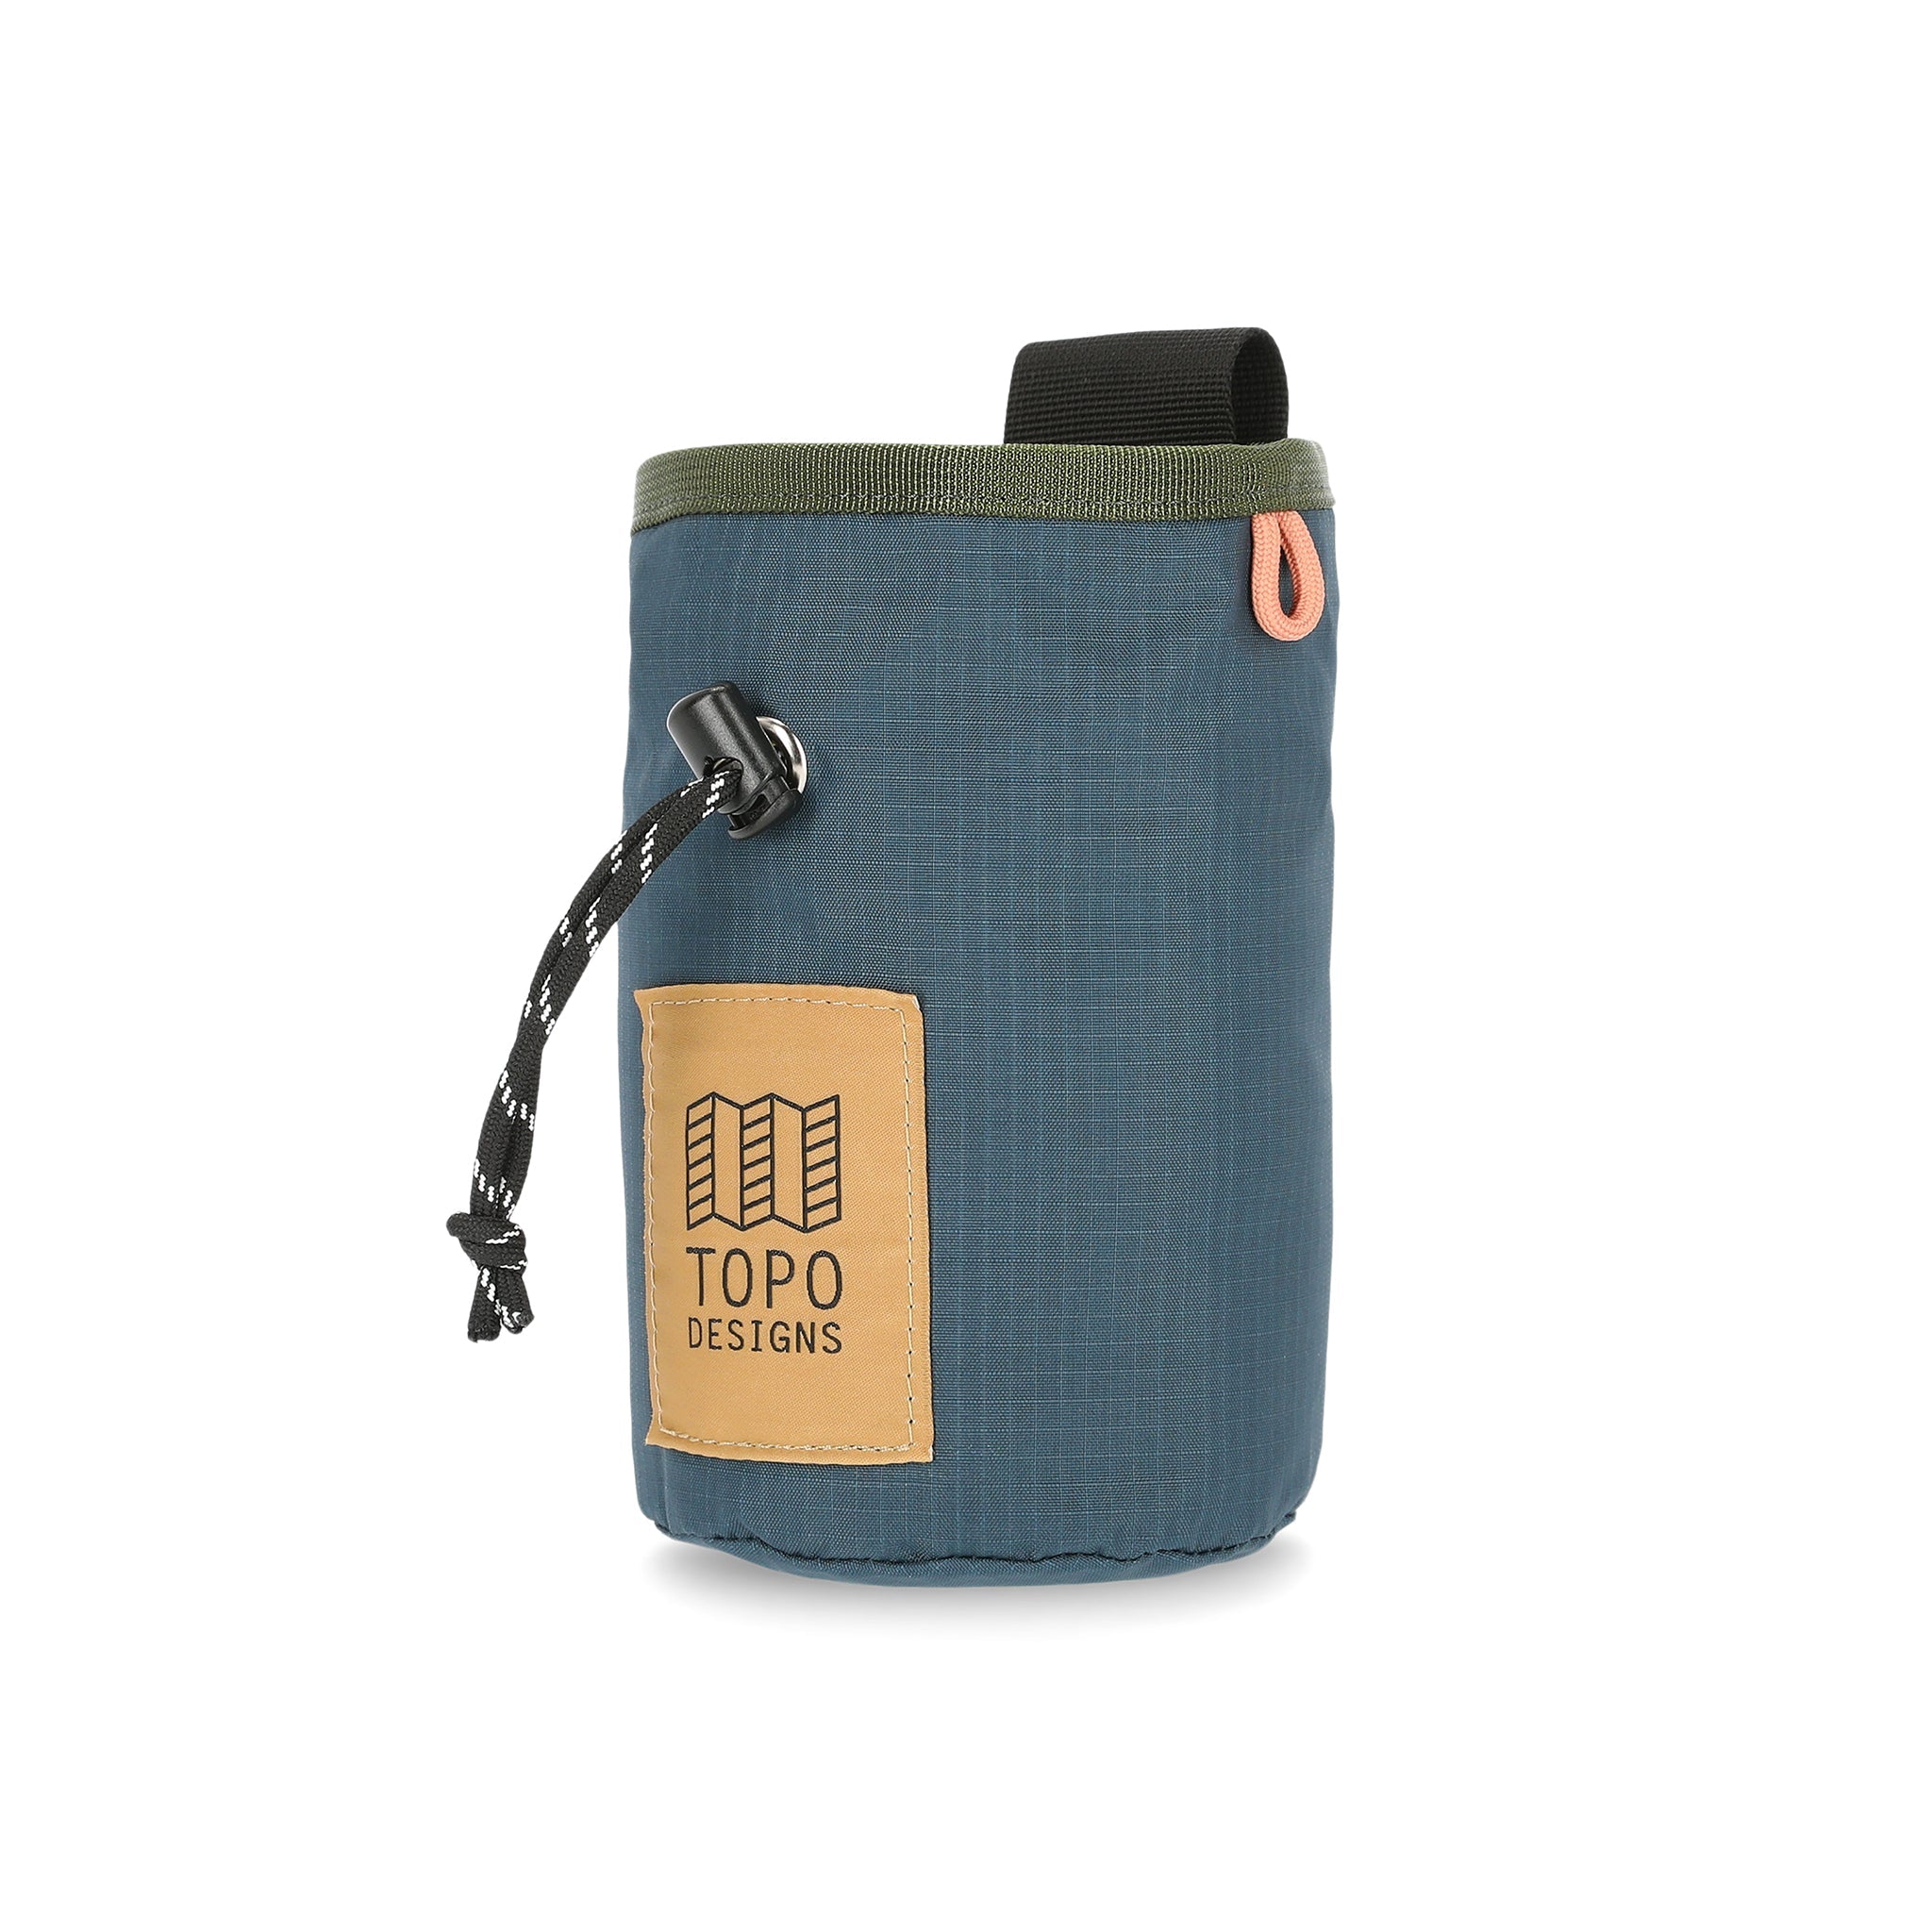 Topo Designs Mountain Chalk Bag for rock climbing and bouldering in lightweight recycled "Pond Blue" nylon.